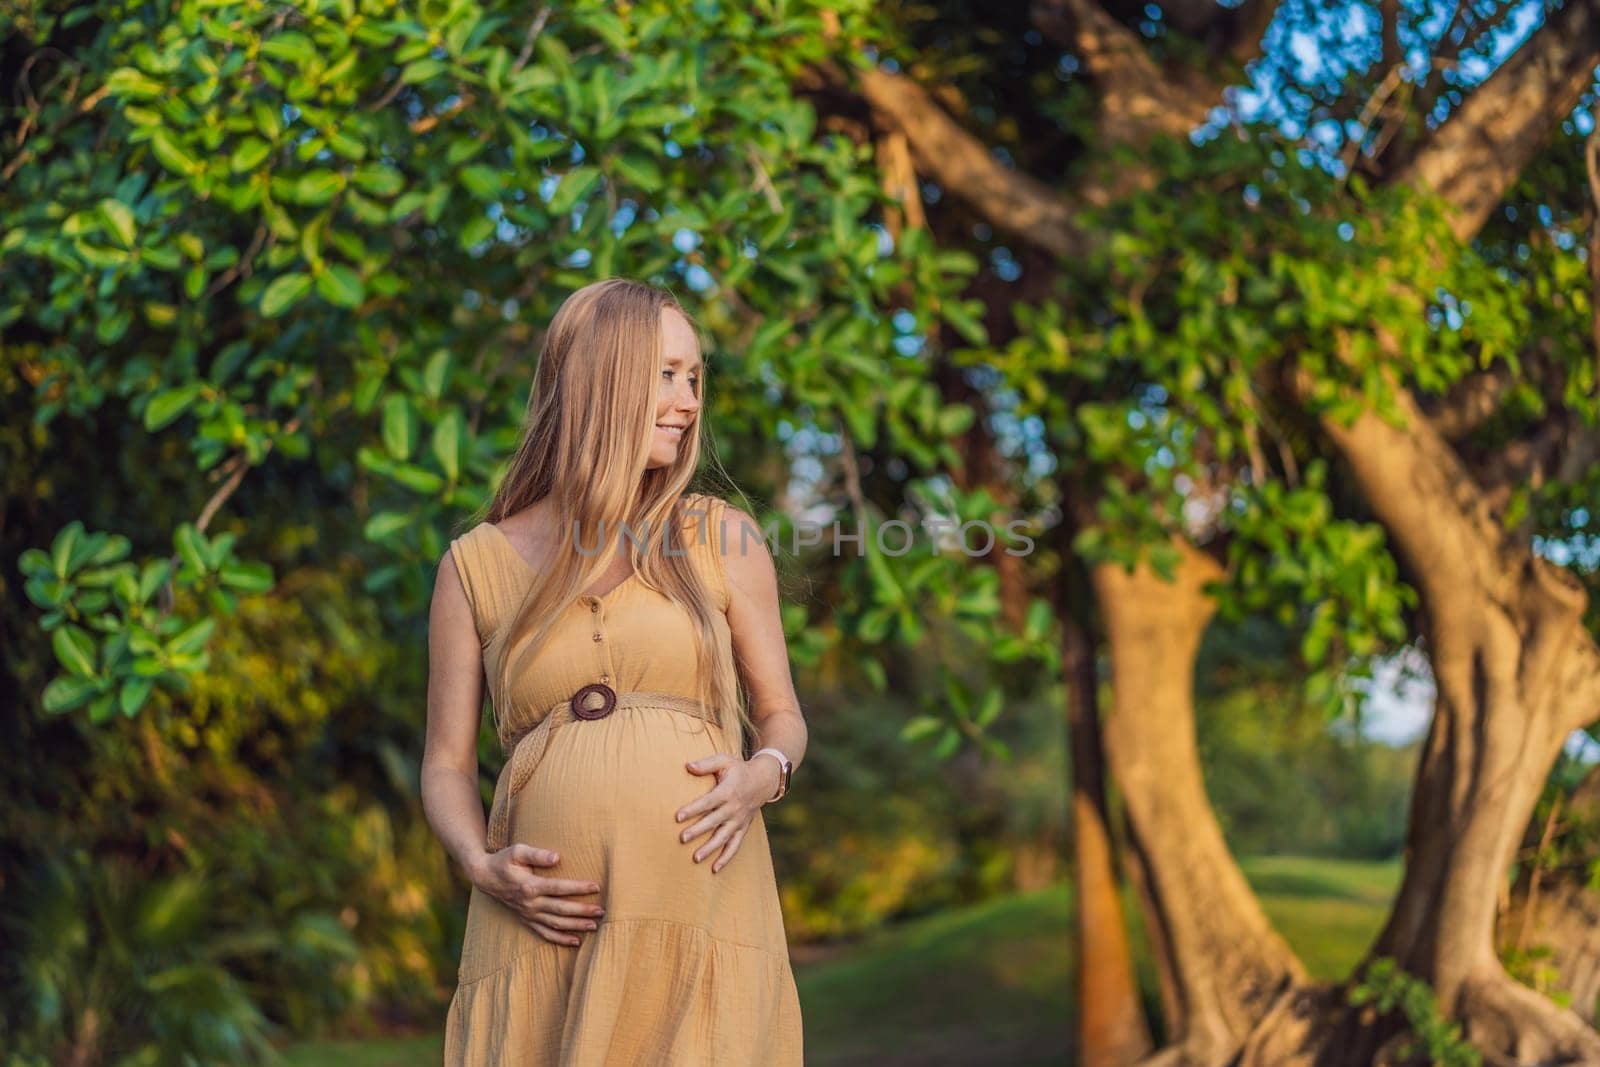 pregnant woman finds joy and serenity, relishing a tranquil moment outdoors during her pregnancy journey by galitskaya